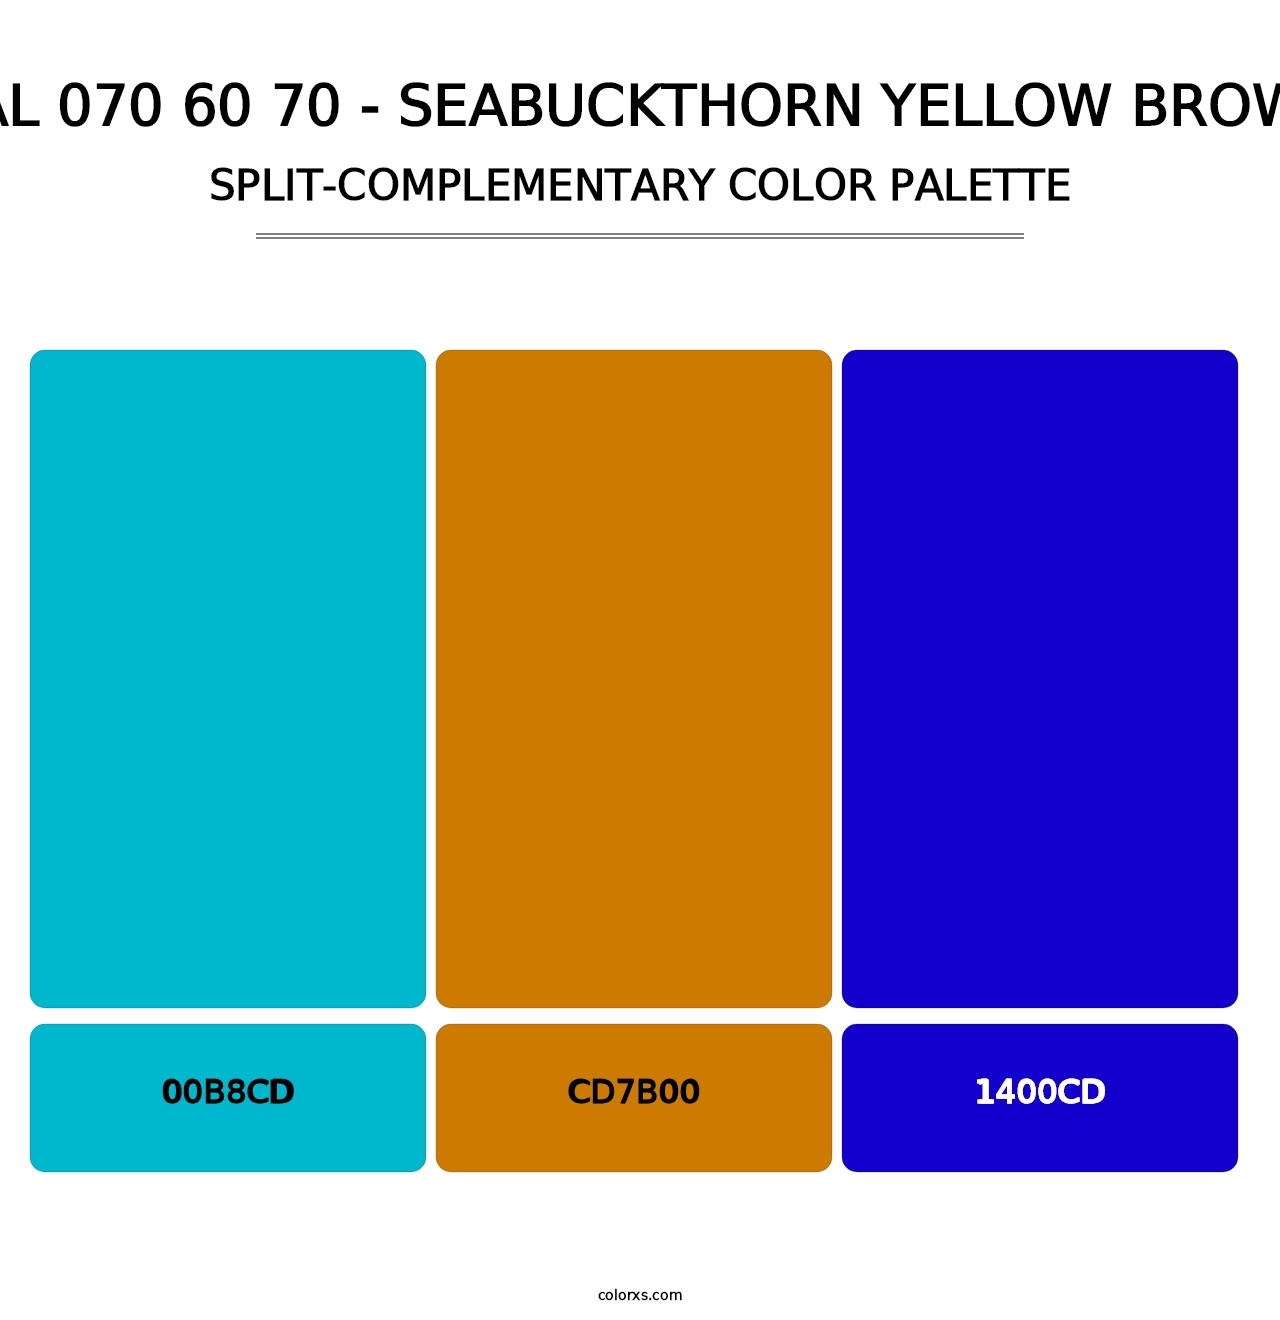 RAL 070 60 70 - Seabuckthorn Yellow Brown - Split-Complementary Color Palette